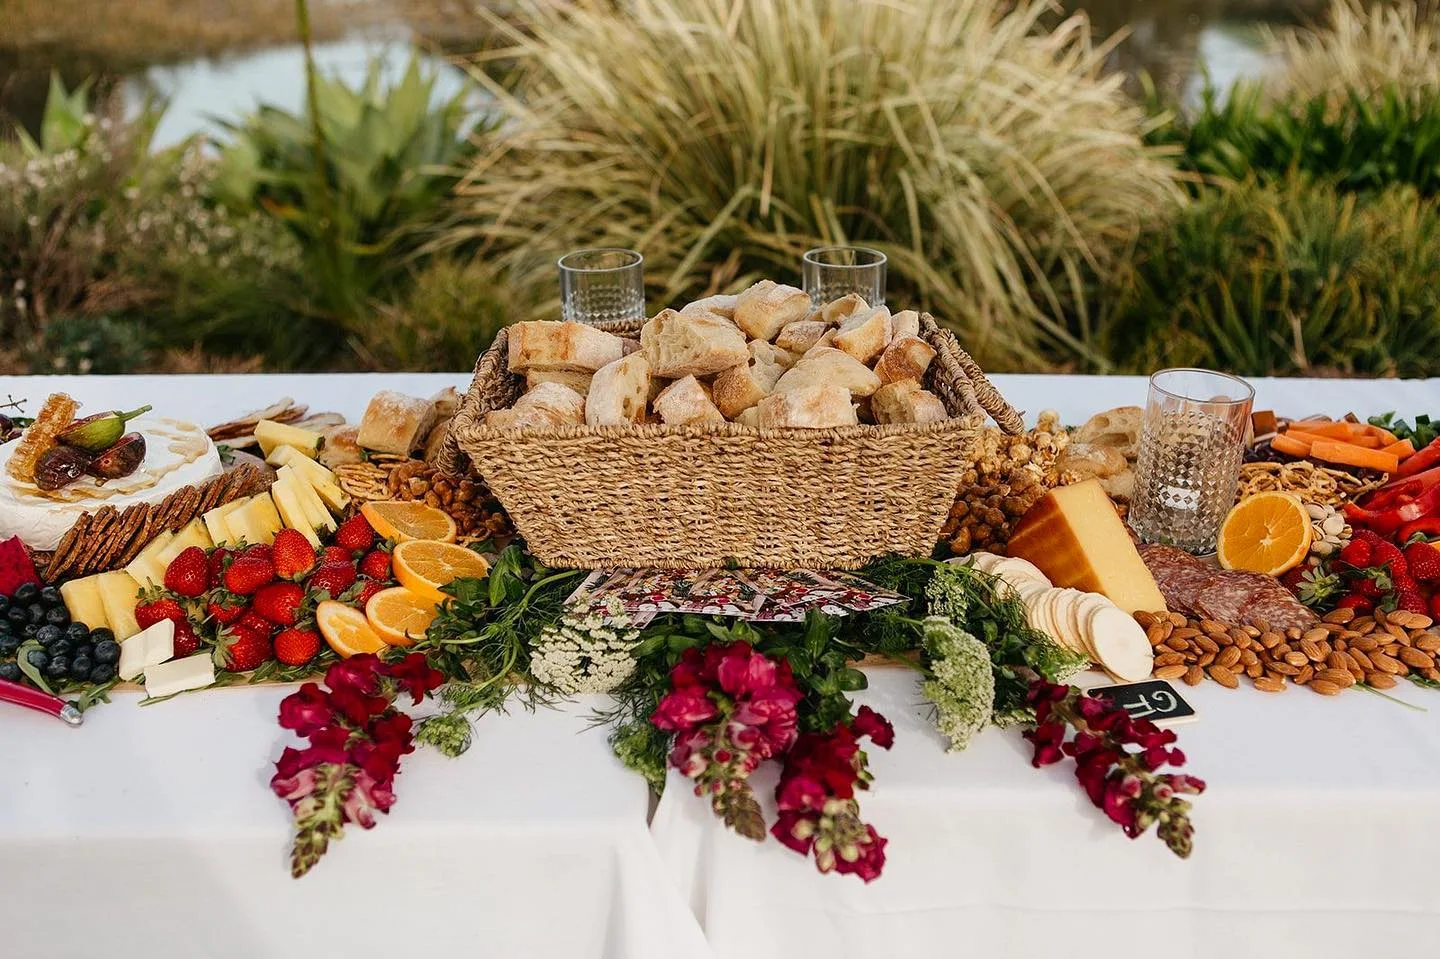 image by stories by ash photography byron bay wedding grazing tables catering boards food